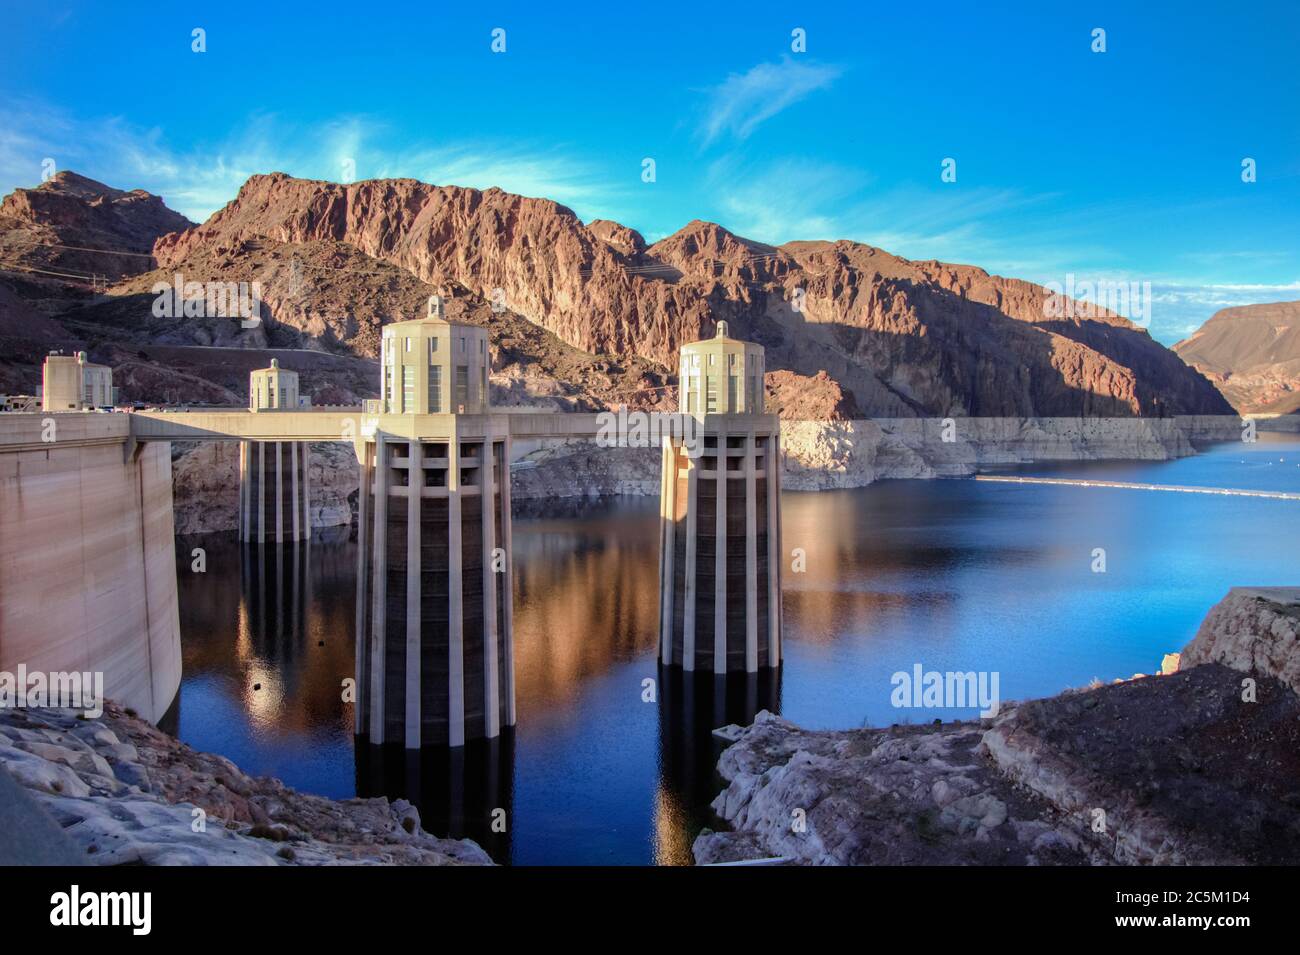 Hoover Dam And Lake Mead Panorama. Scenic wide angle view of Hoover Dam and Lake Mead on the Arizona Nevada border. Stock Photo